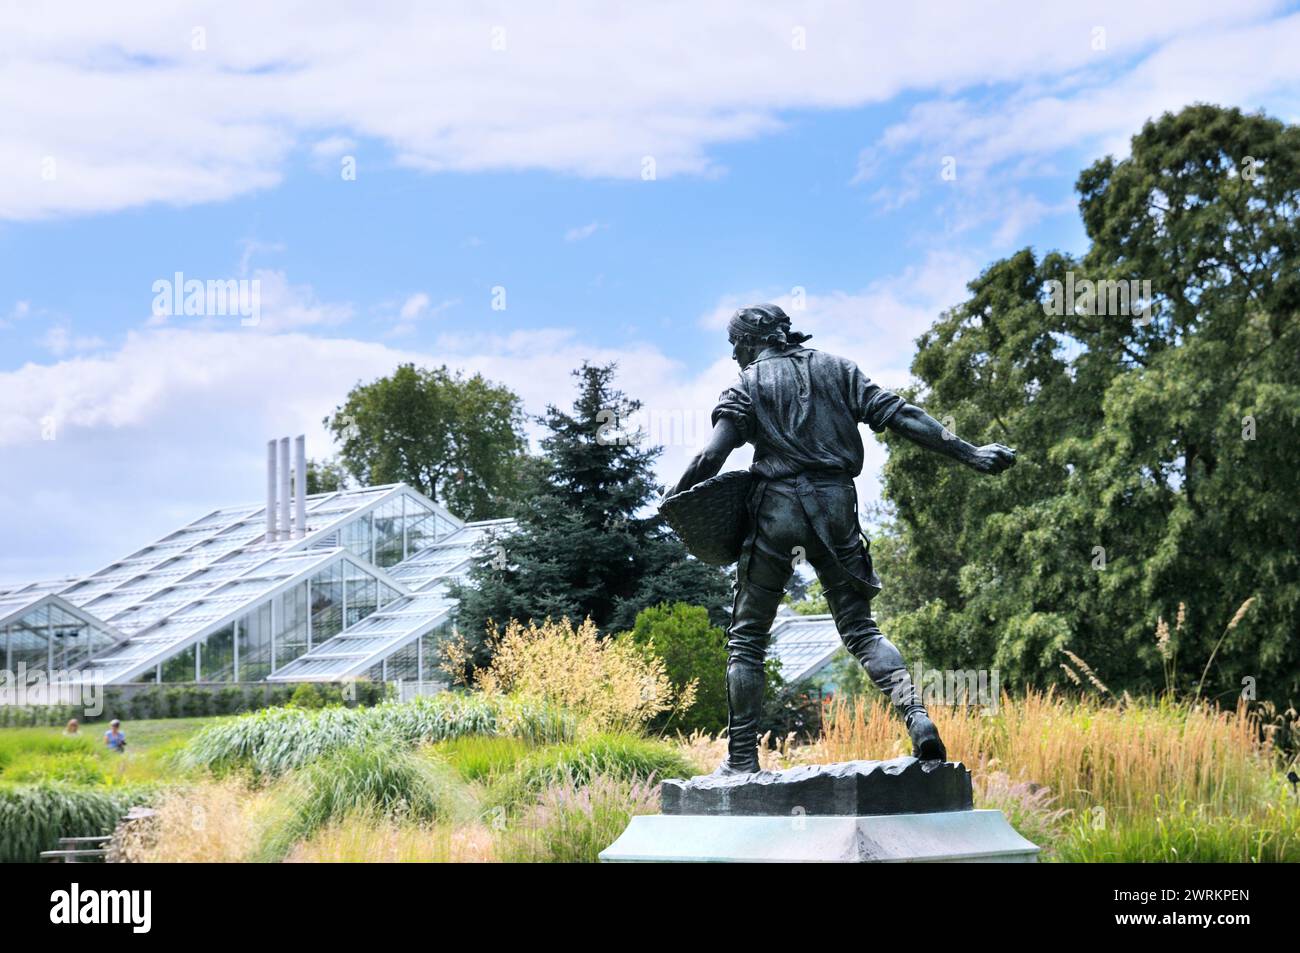 The Sower statue by Hamo Thornycroft in the Grass Garden near the Princess of Wales Conservatory, Royal Botanic Gardens, Kew, London, UK. Kew Gardens Stock Photo